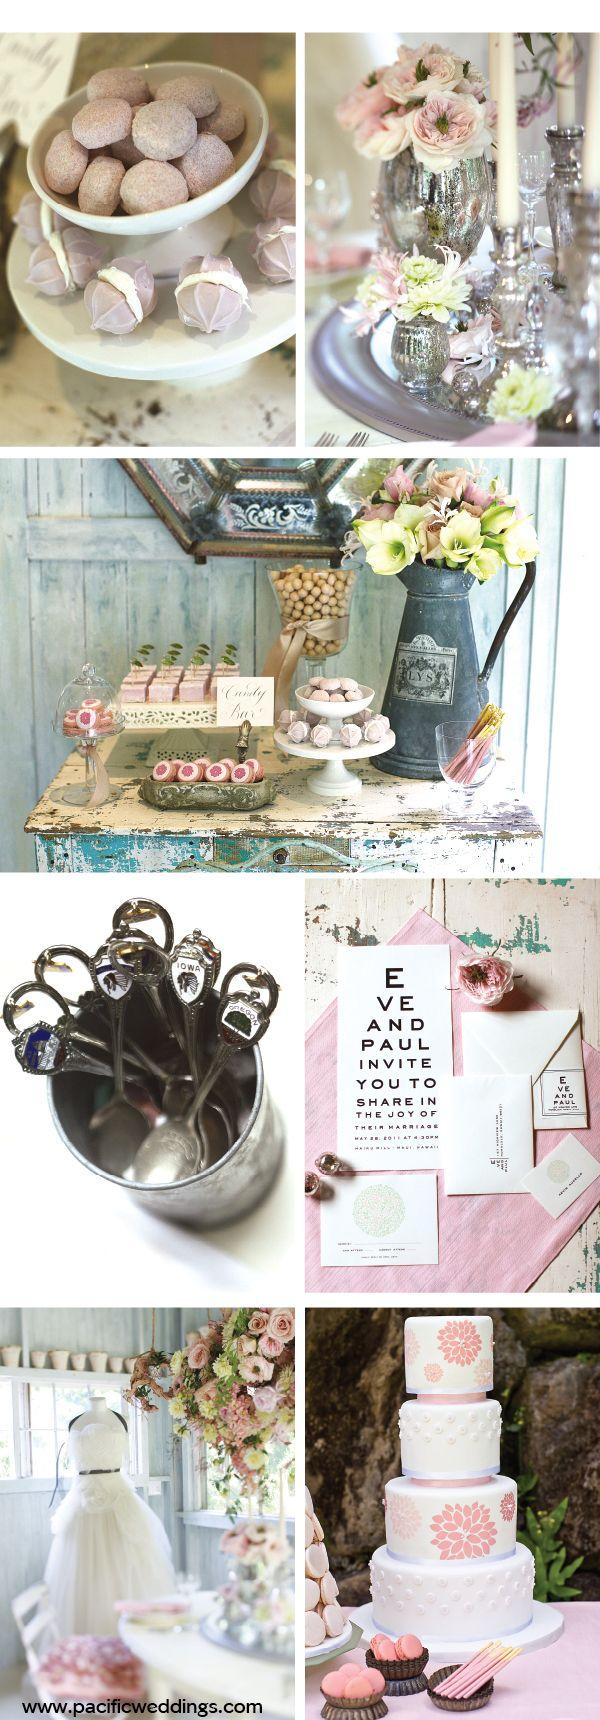 Wedding - Eye Chart Invitation Suite For PW 